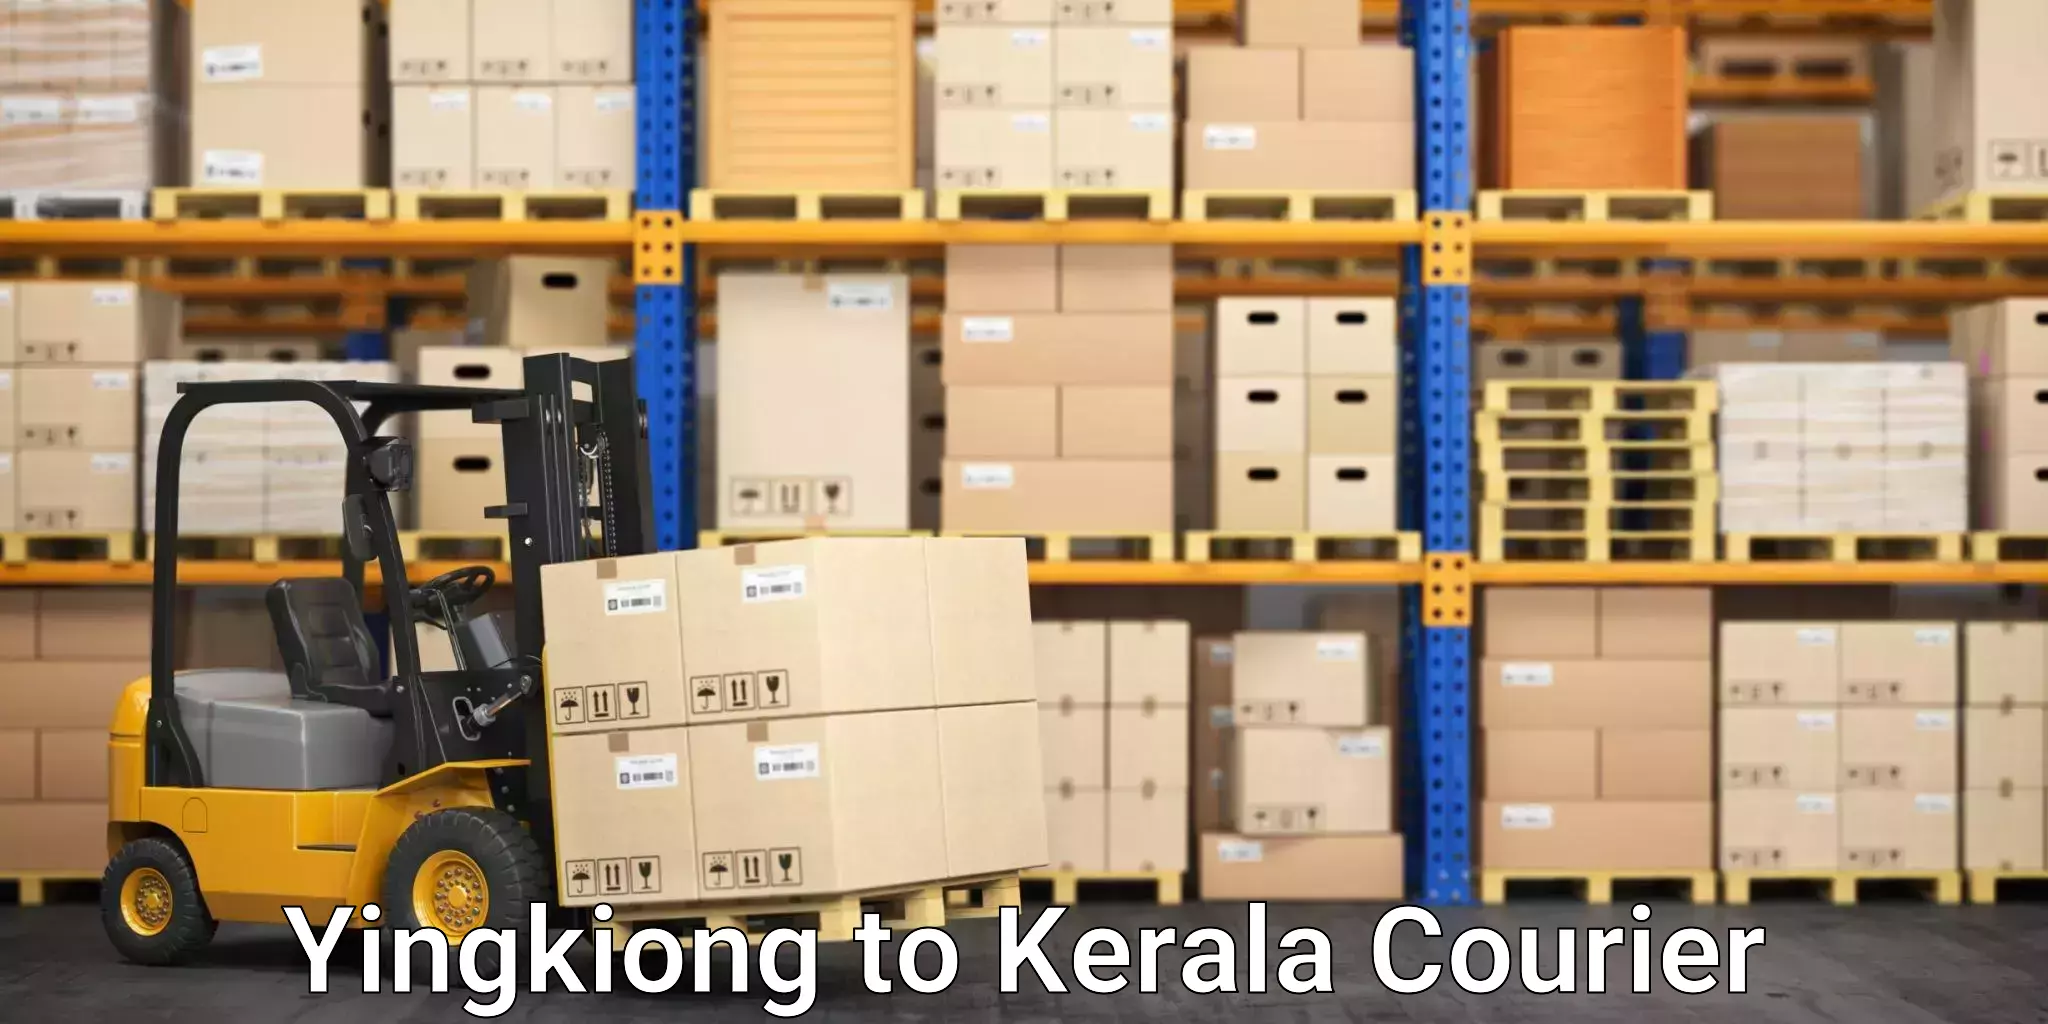 Reliable delivery network Yingkiong to Kerala